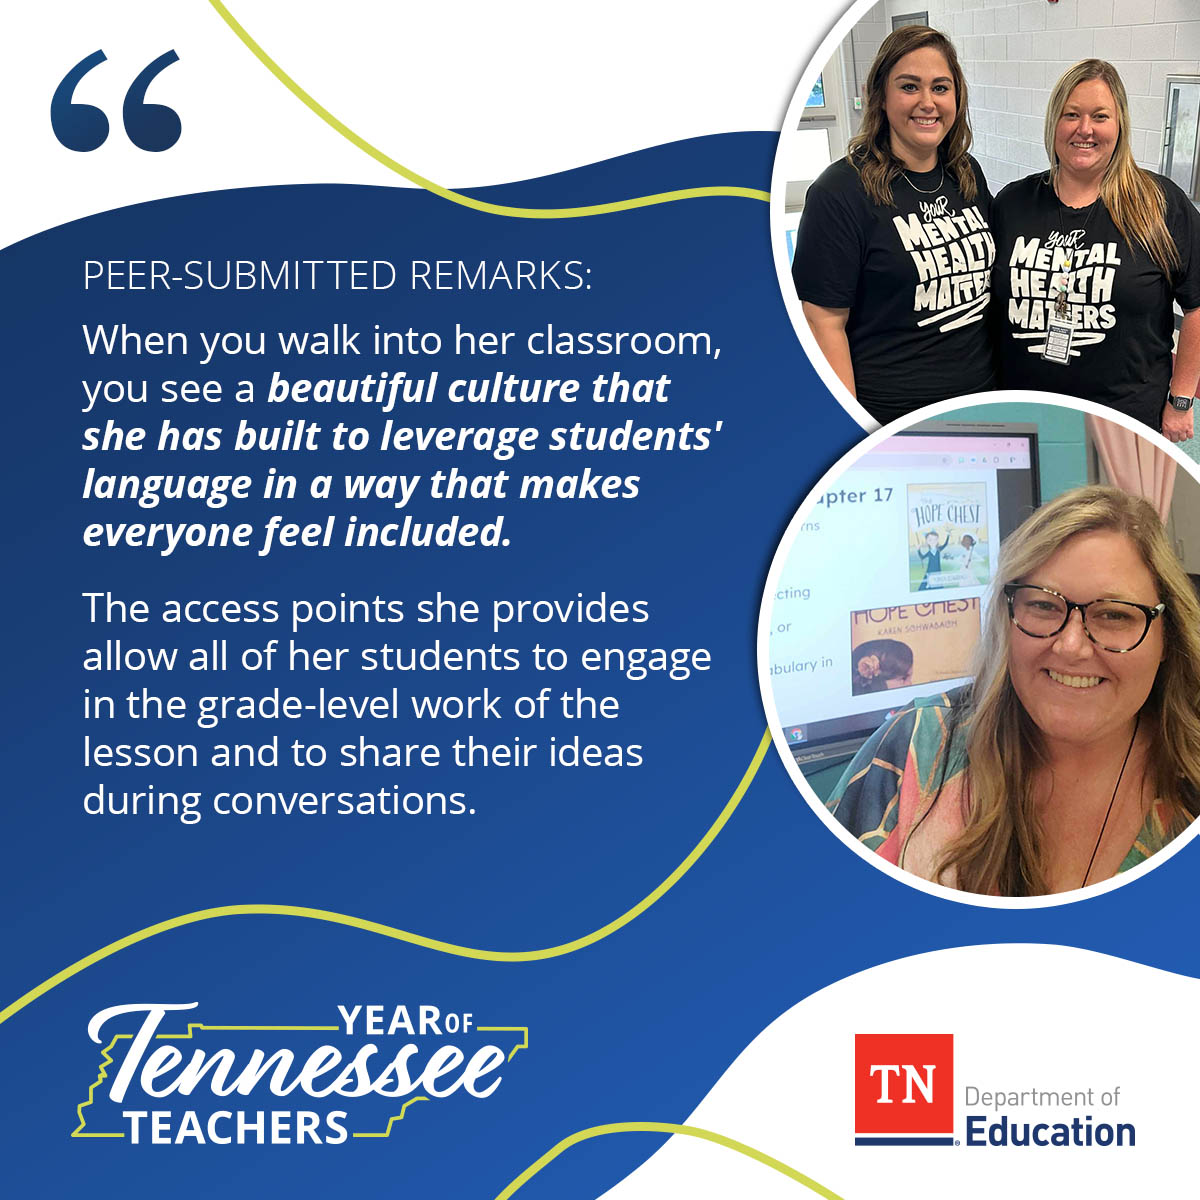 We'd like to spotlight Jamie Helta from @blackfoxelem, who was nominated by her peers for creating a supportive culture in her classroom to help all her students succeed. #TNSupportsTeachers